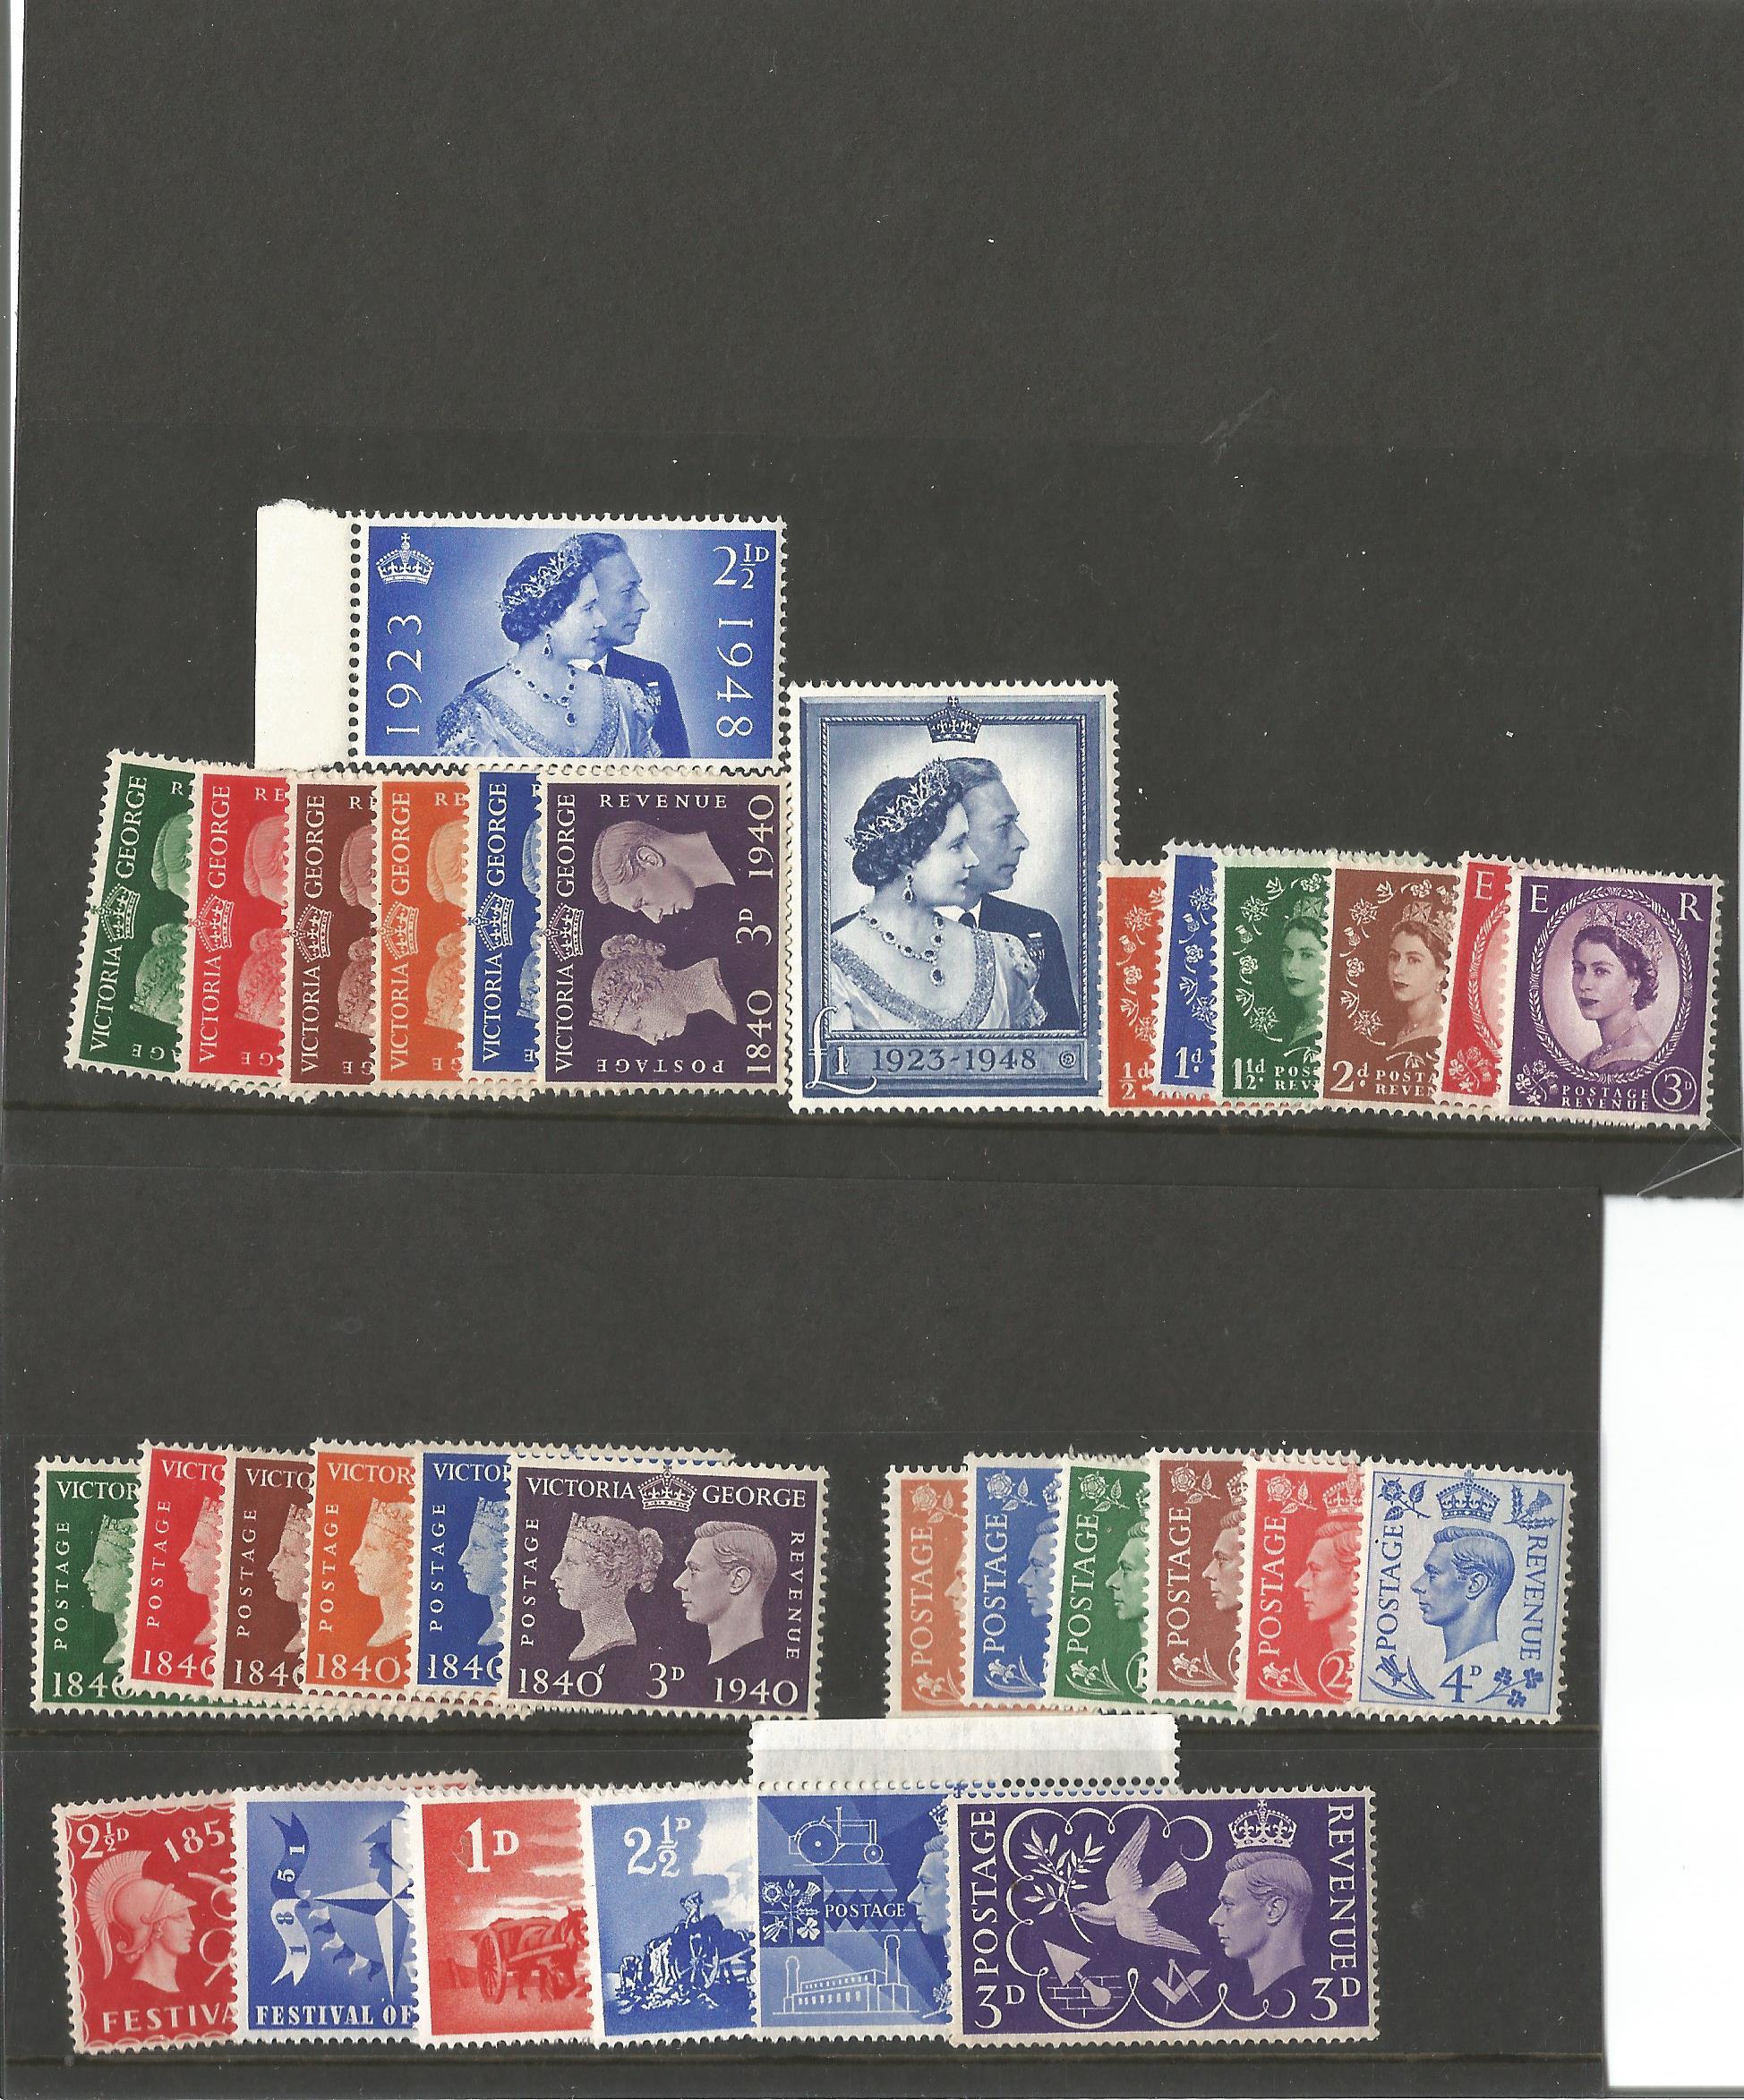 GB mint Stamps George VI & Elizabeth II Includes George VI Definitives halfpenny, one penny, one and